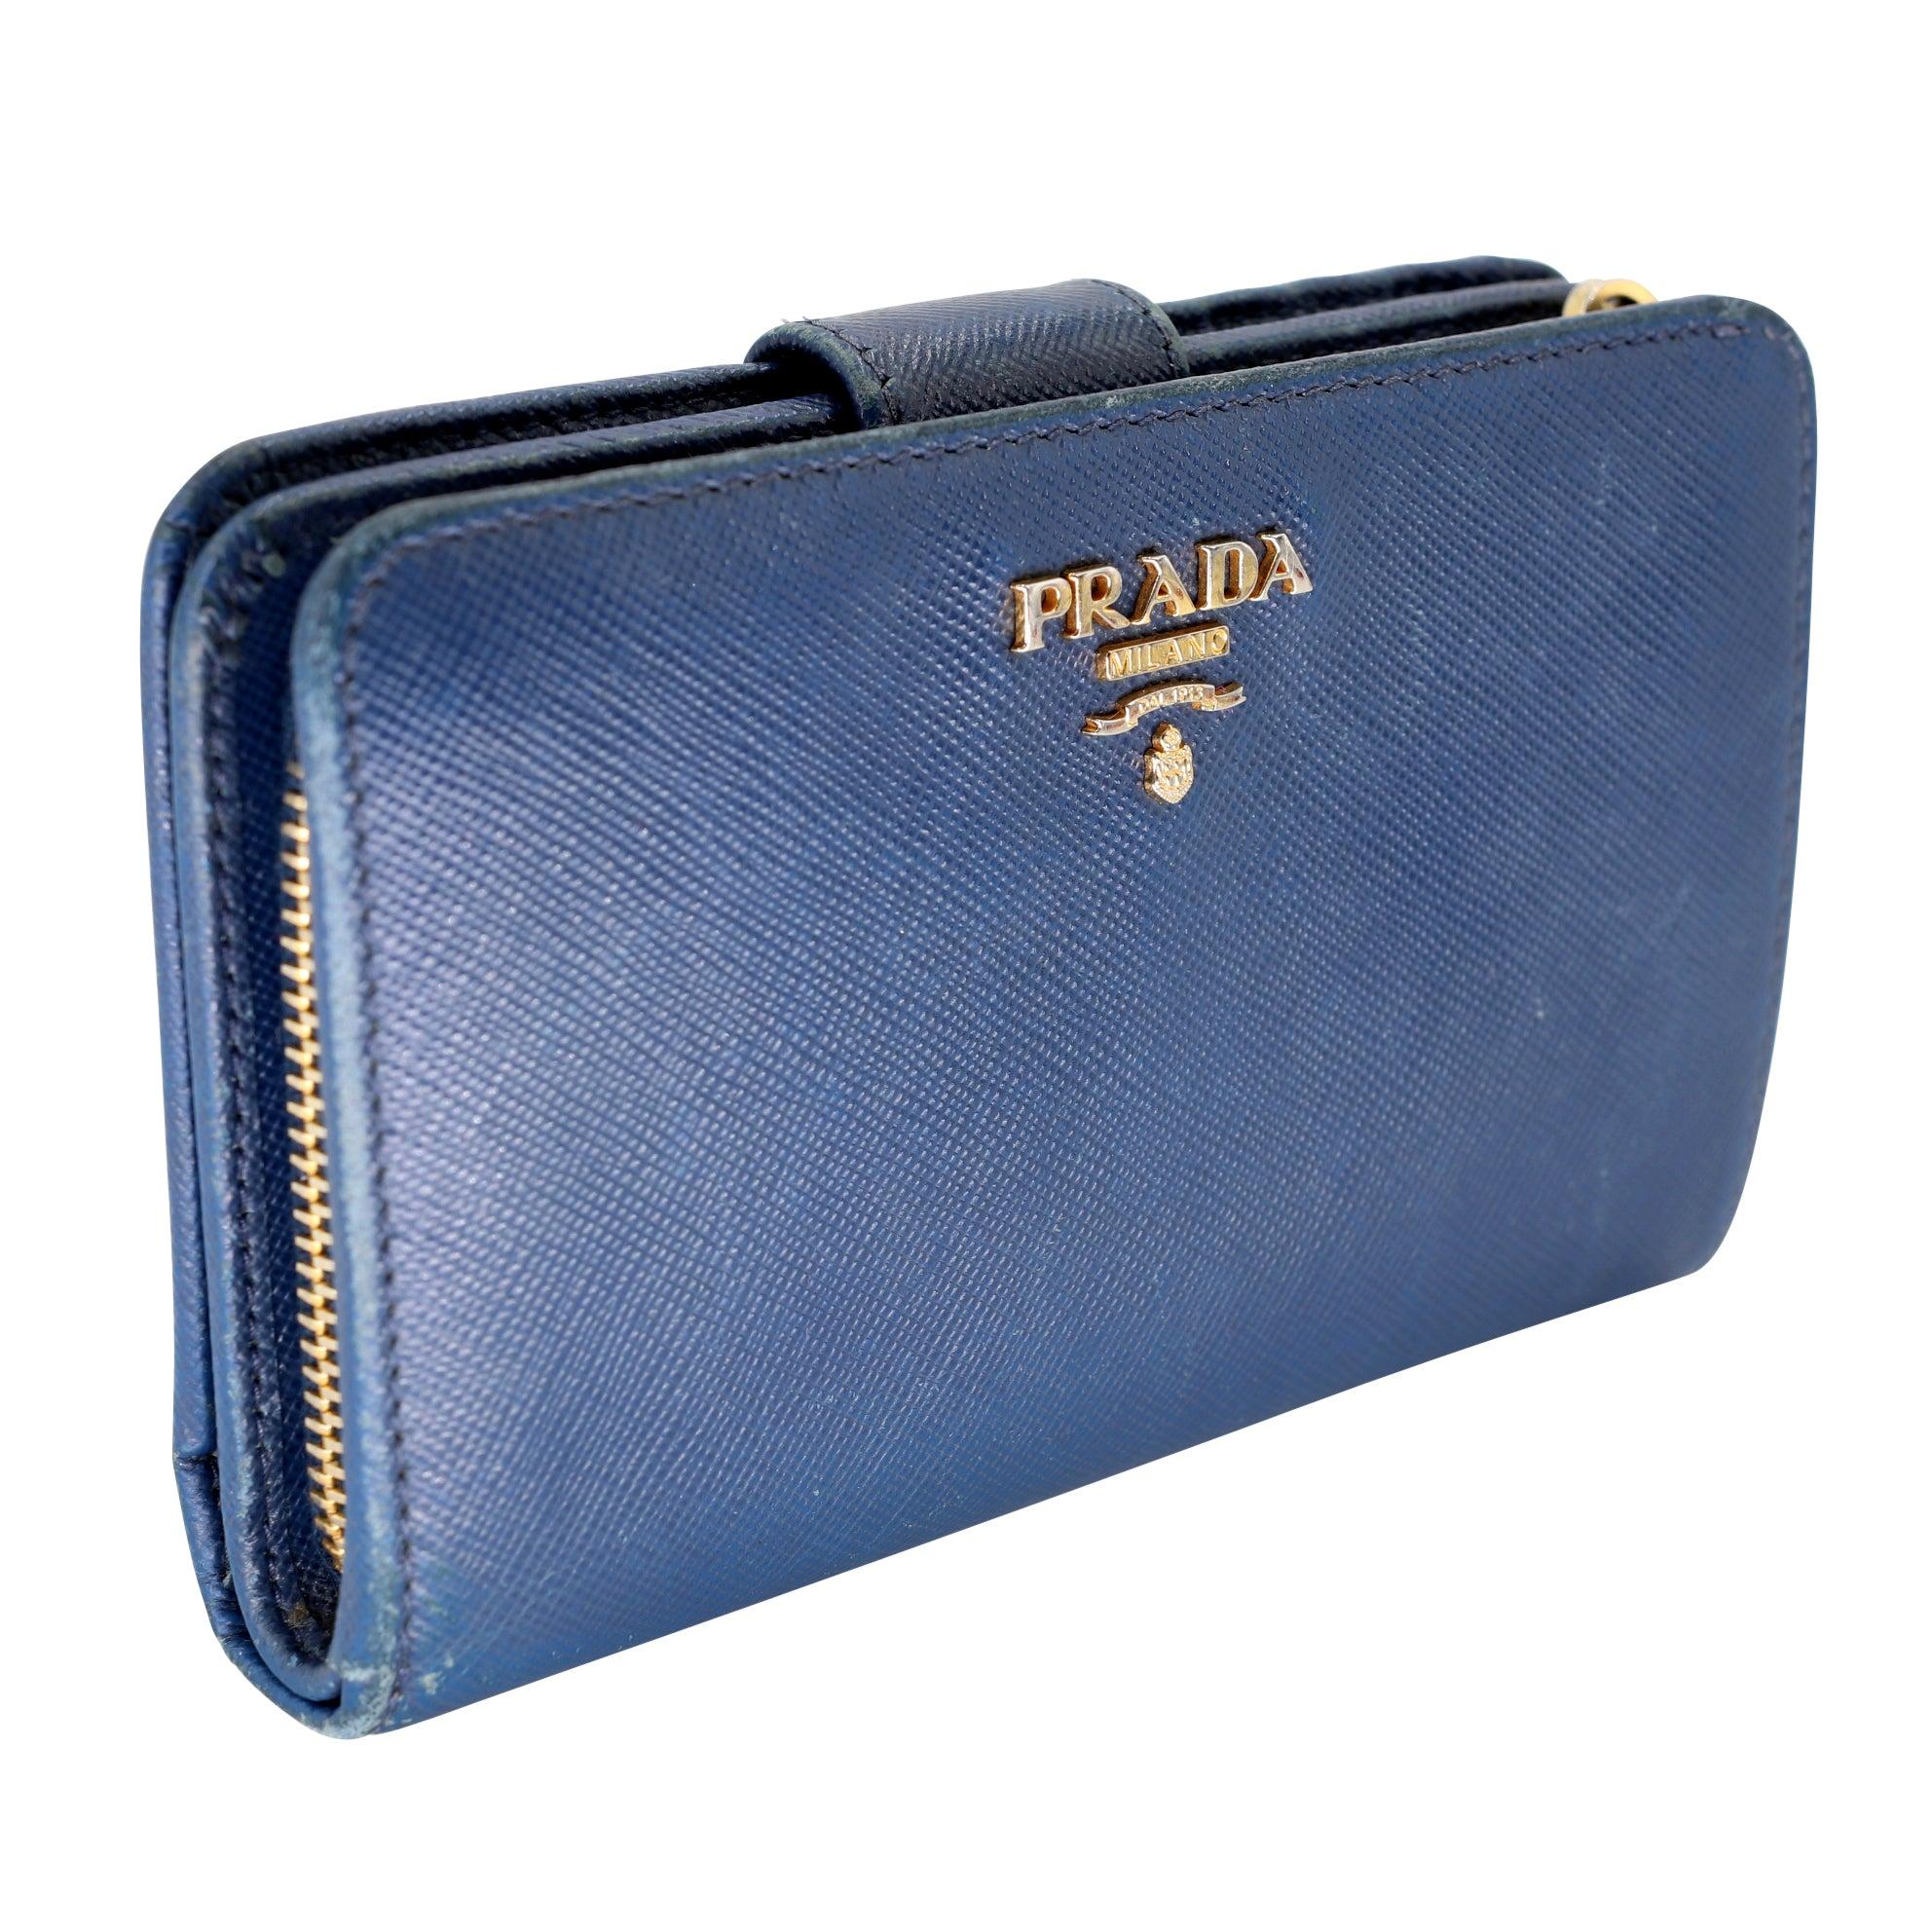 This cute and sophisticated small Prada Saffiano wallet features a durable Saffiano leather and gold-tone hardware accents with a button lock closure. It will hold all your credit cards as well as your on-the-go coins and more. The exterior leather